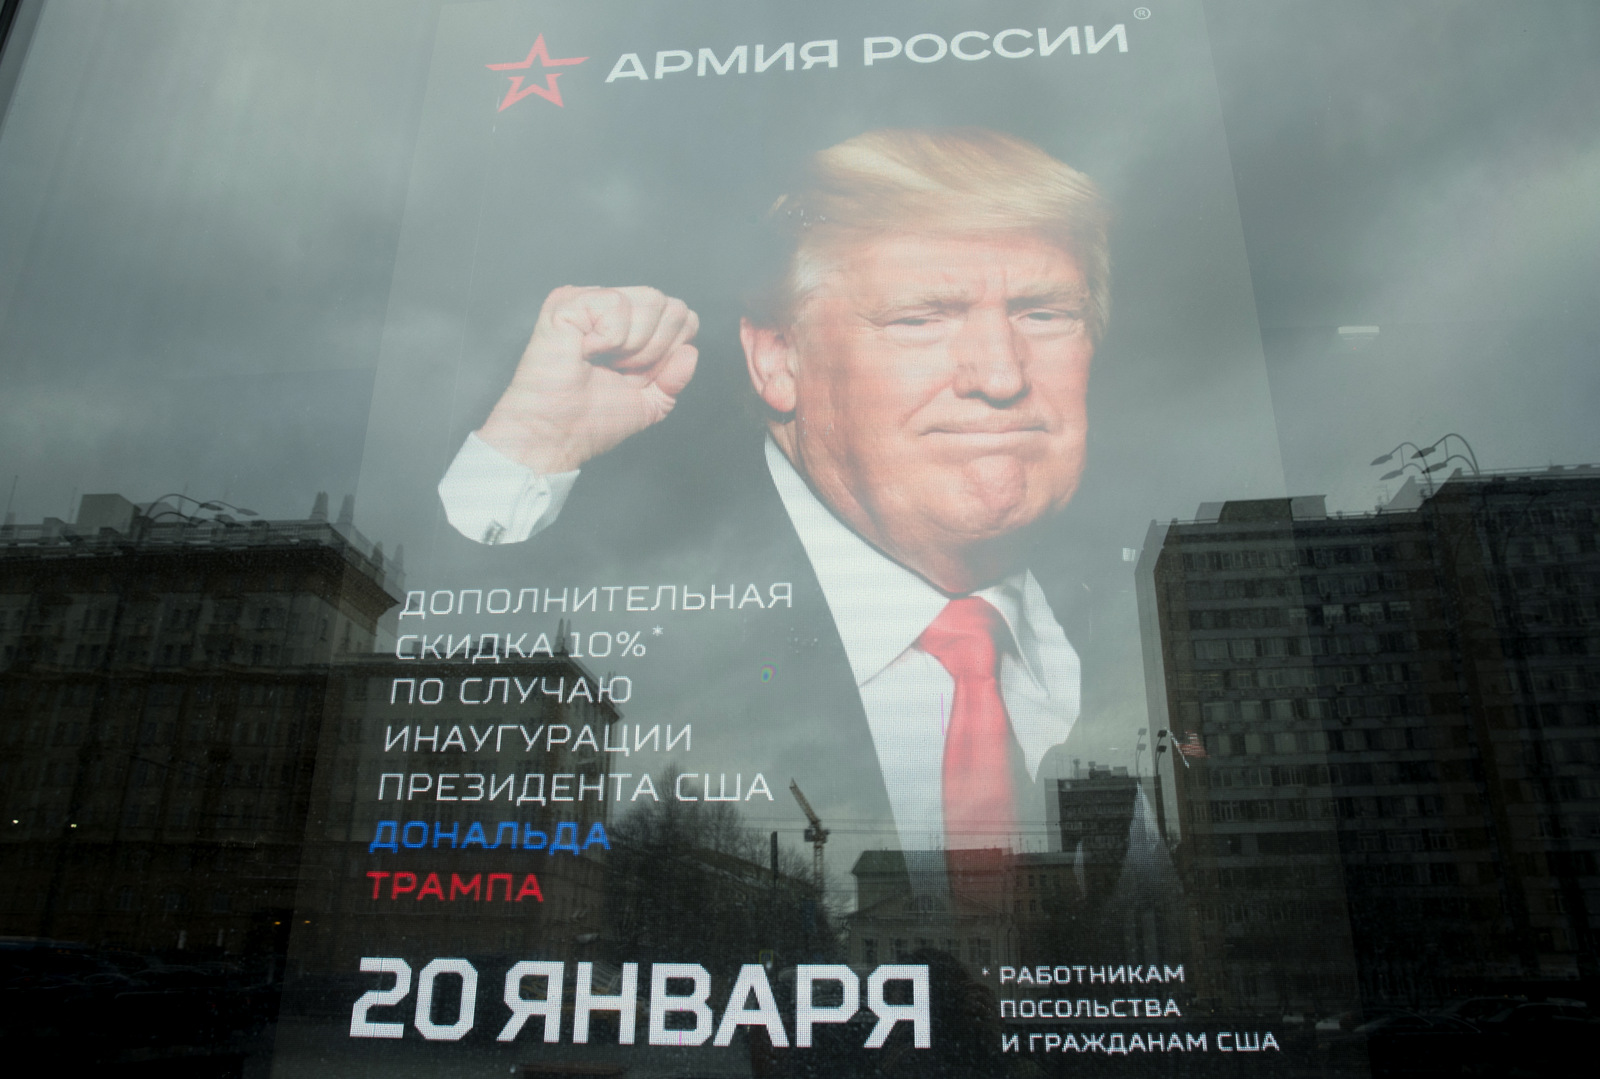 The U.S. Embassy building is reflected in a window of a Russian military outerwear shop "Armia Rossii" (Russian Army) displaying a poster of Donald Trump, in downtown Moscow, Russia, Friday, Jan. 20, 2017, hours ahead of Donald Trump being sworn in as president of the United States, The poster reads: "10 percent discount to the embassy employees and US citizens on the Inauguration Day". (AP/Pavel Golovkin)